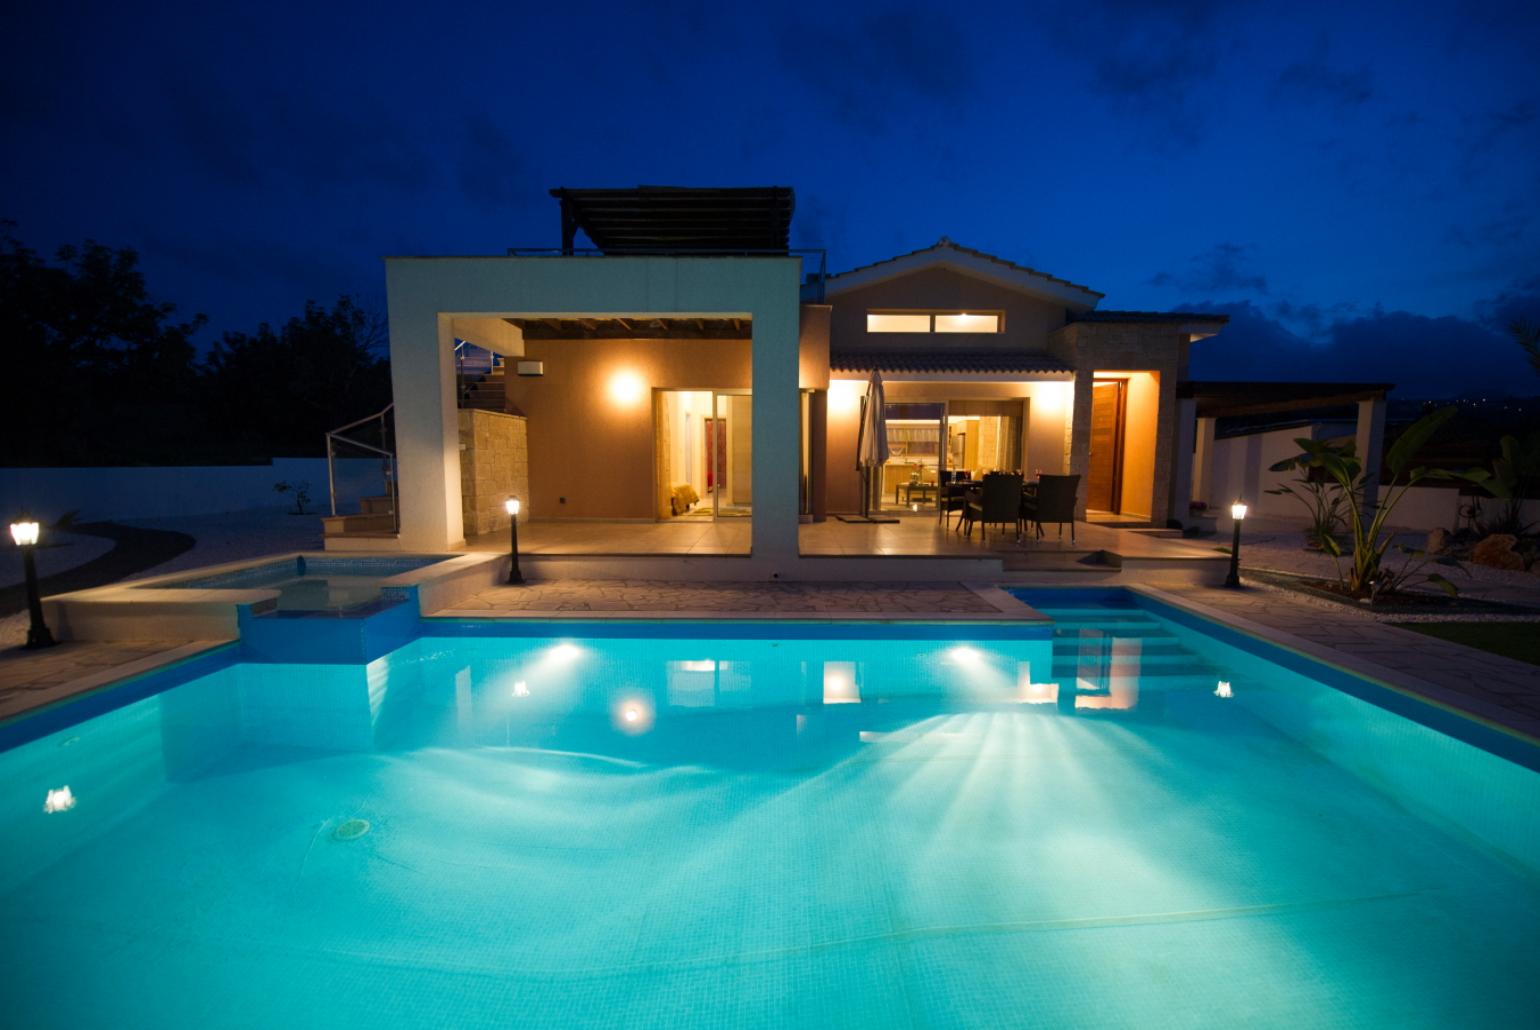 Private pool with terrace and garden area